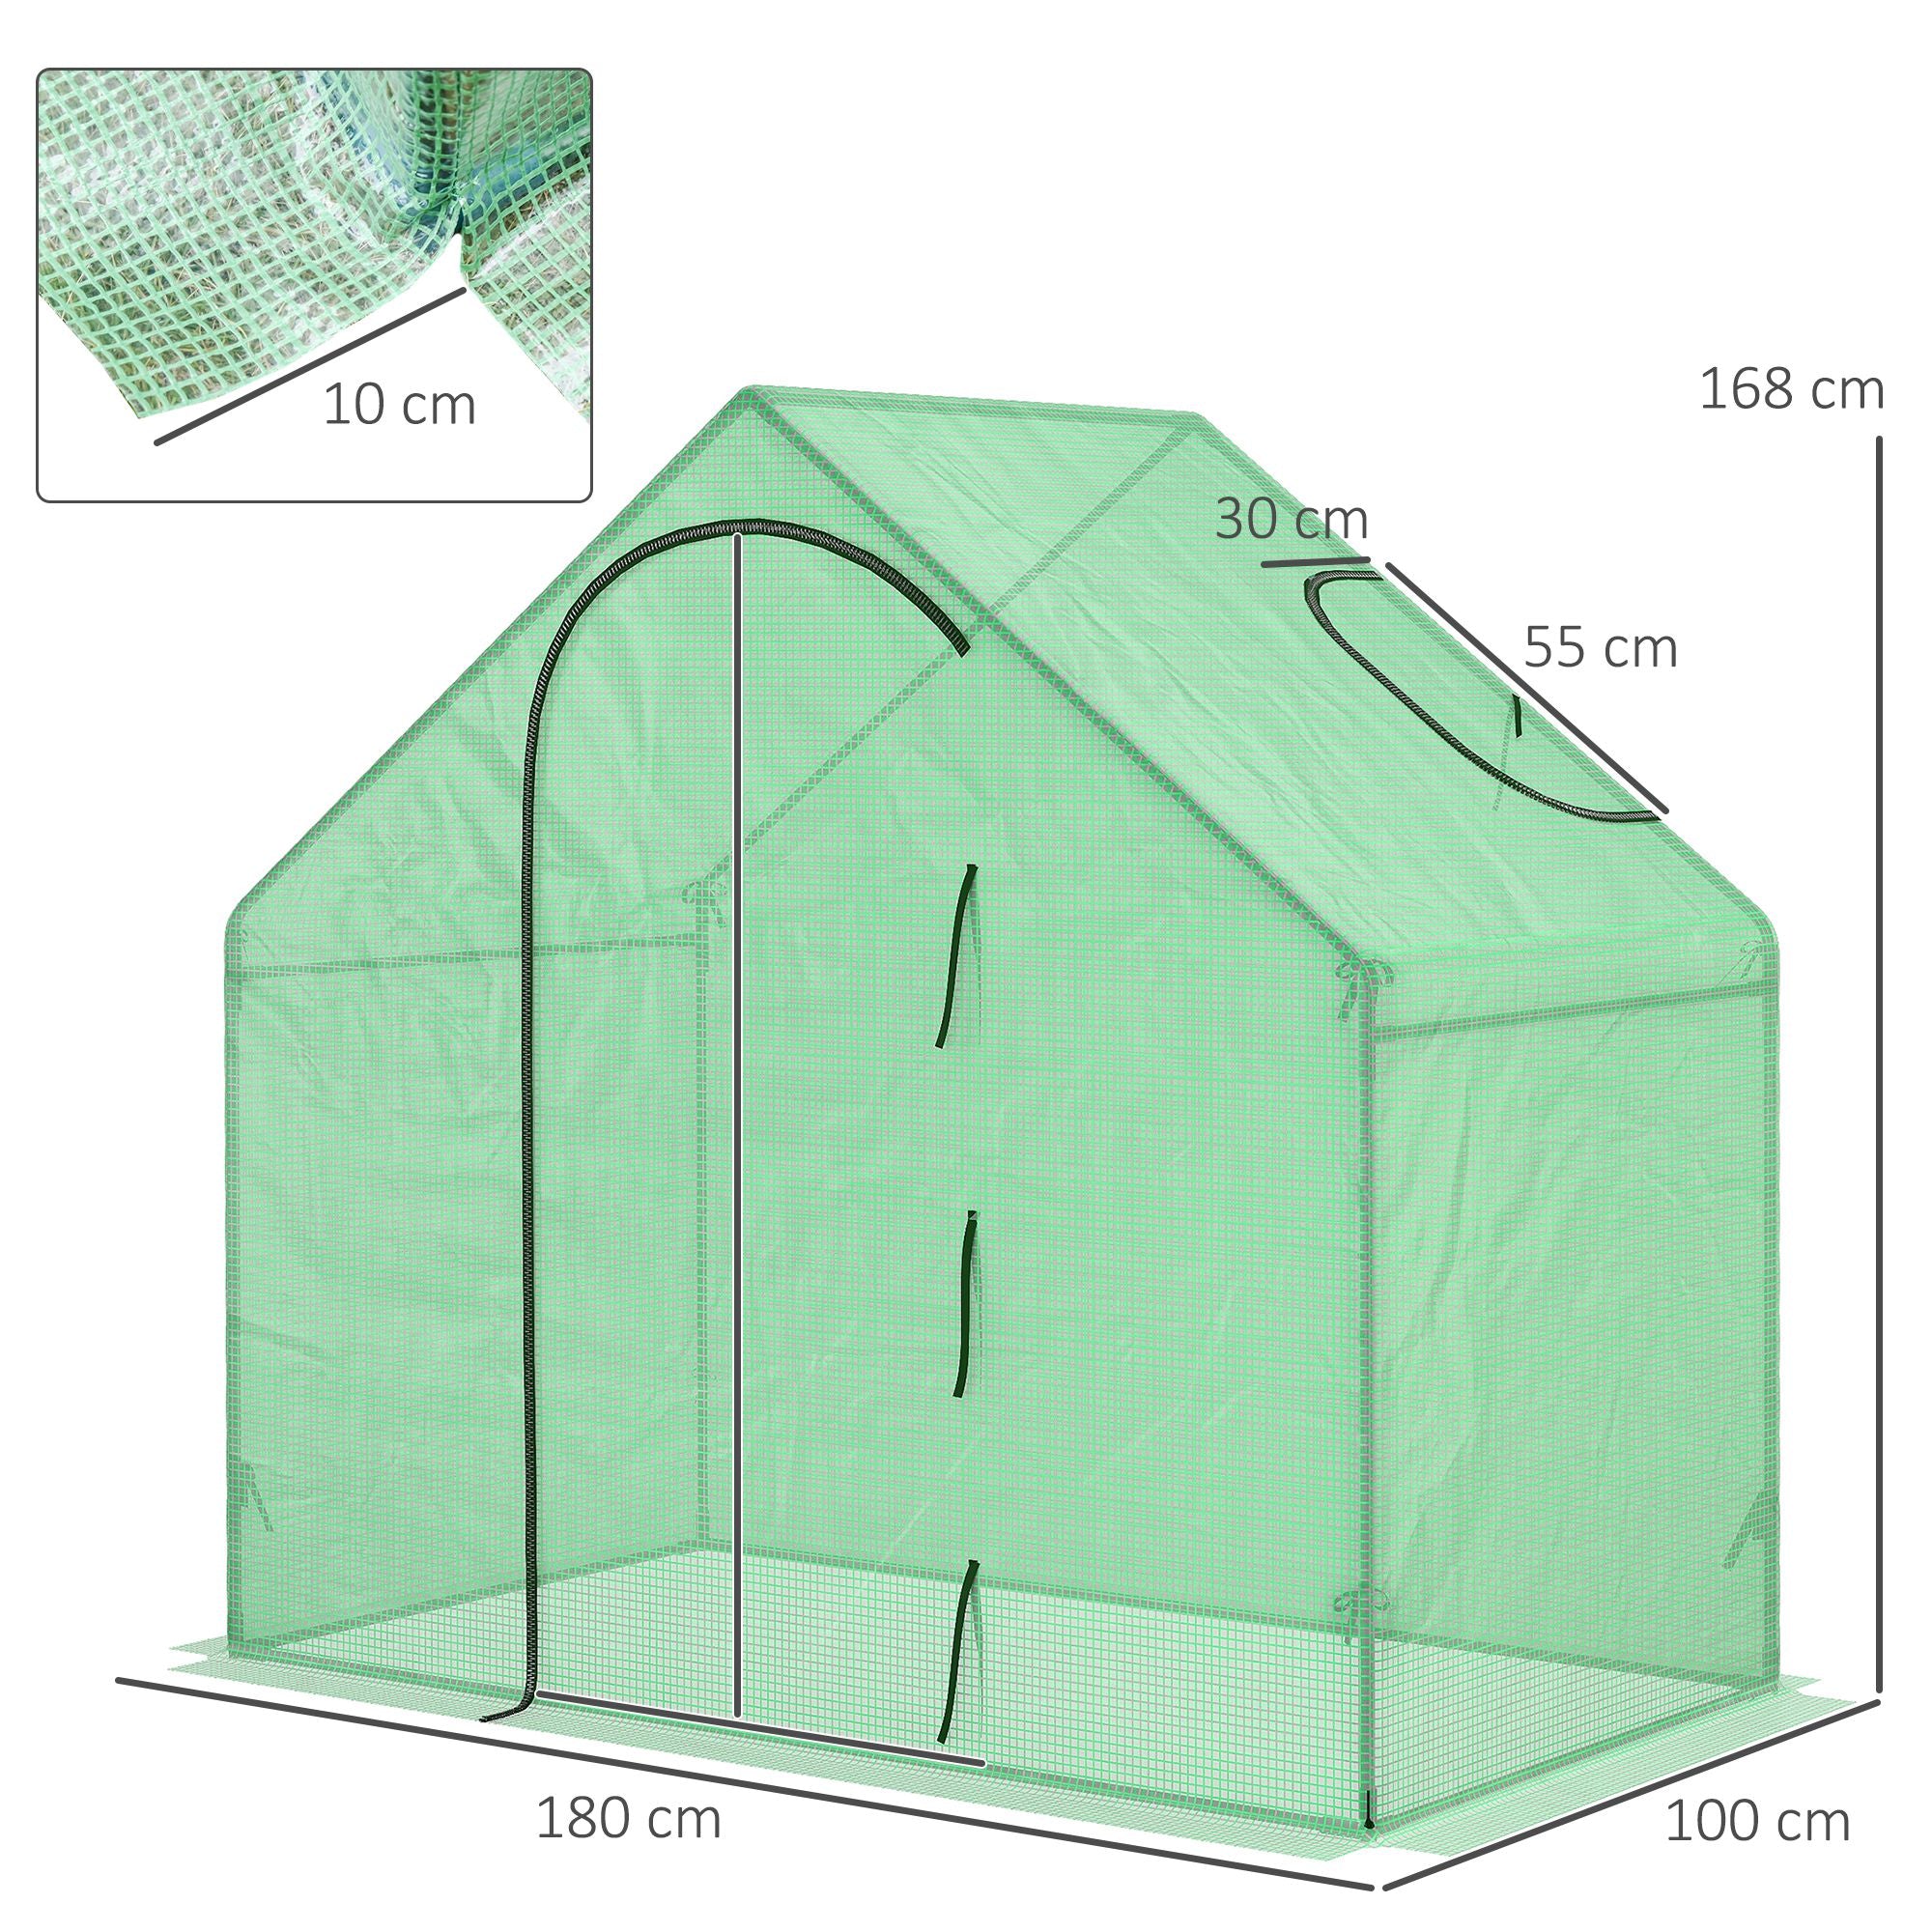 Outsunny Walk in Greenhouse Garden Grow House with Roll Up Door and Window, 180 x 100 x 168 cm, Green - Inspirely